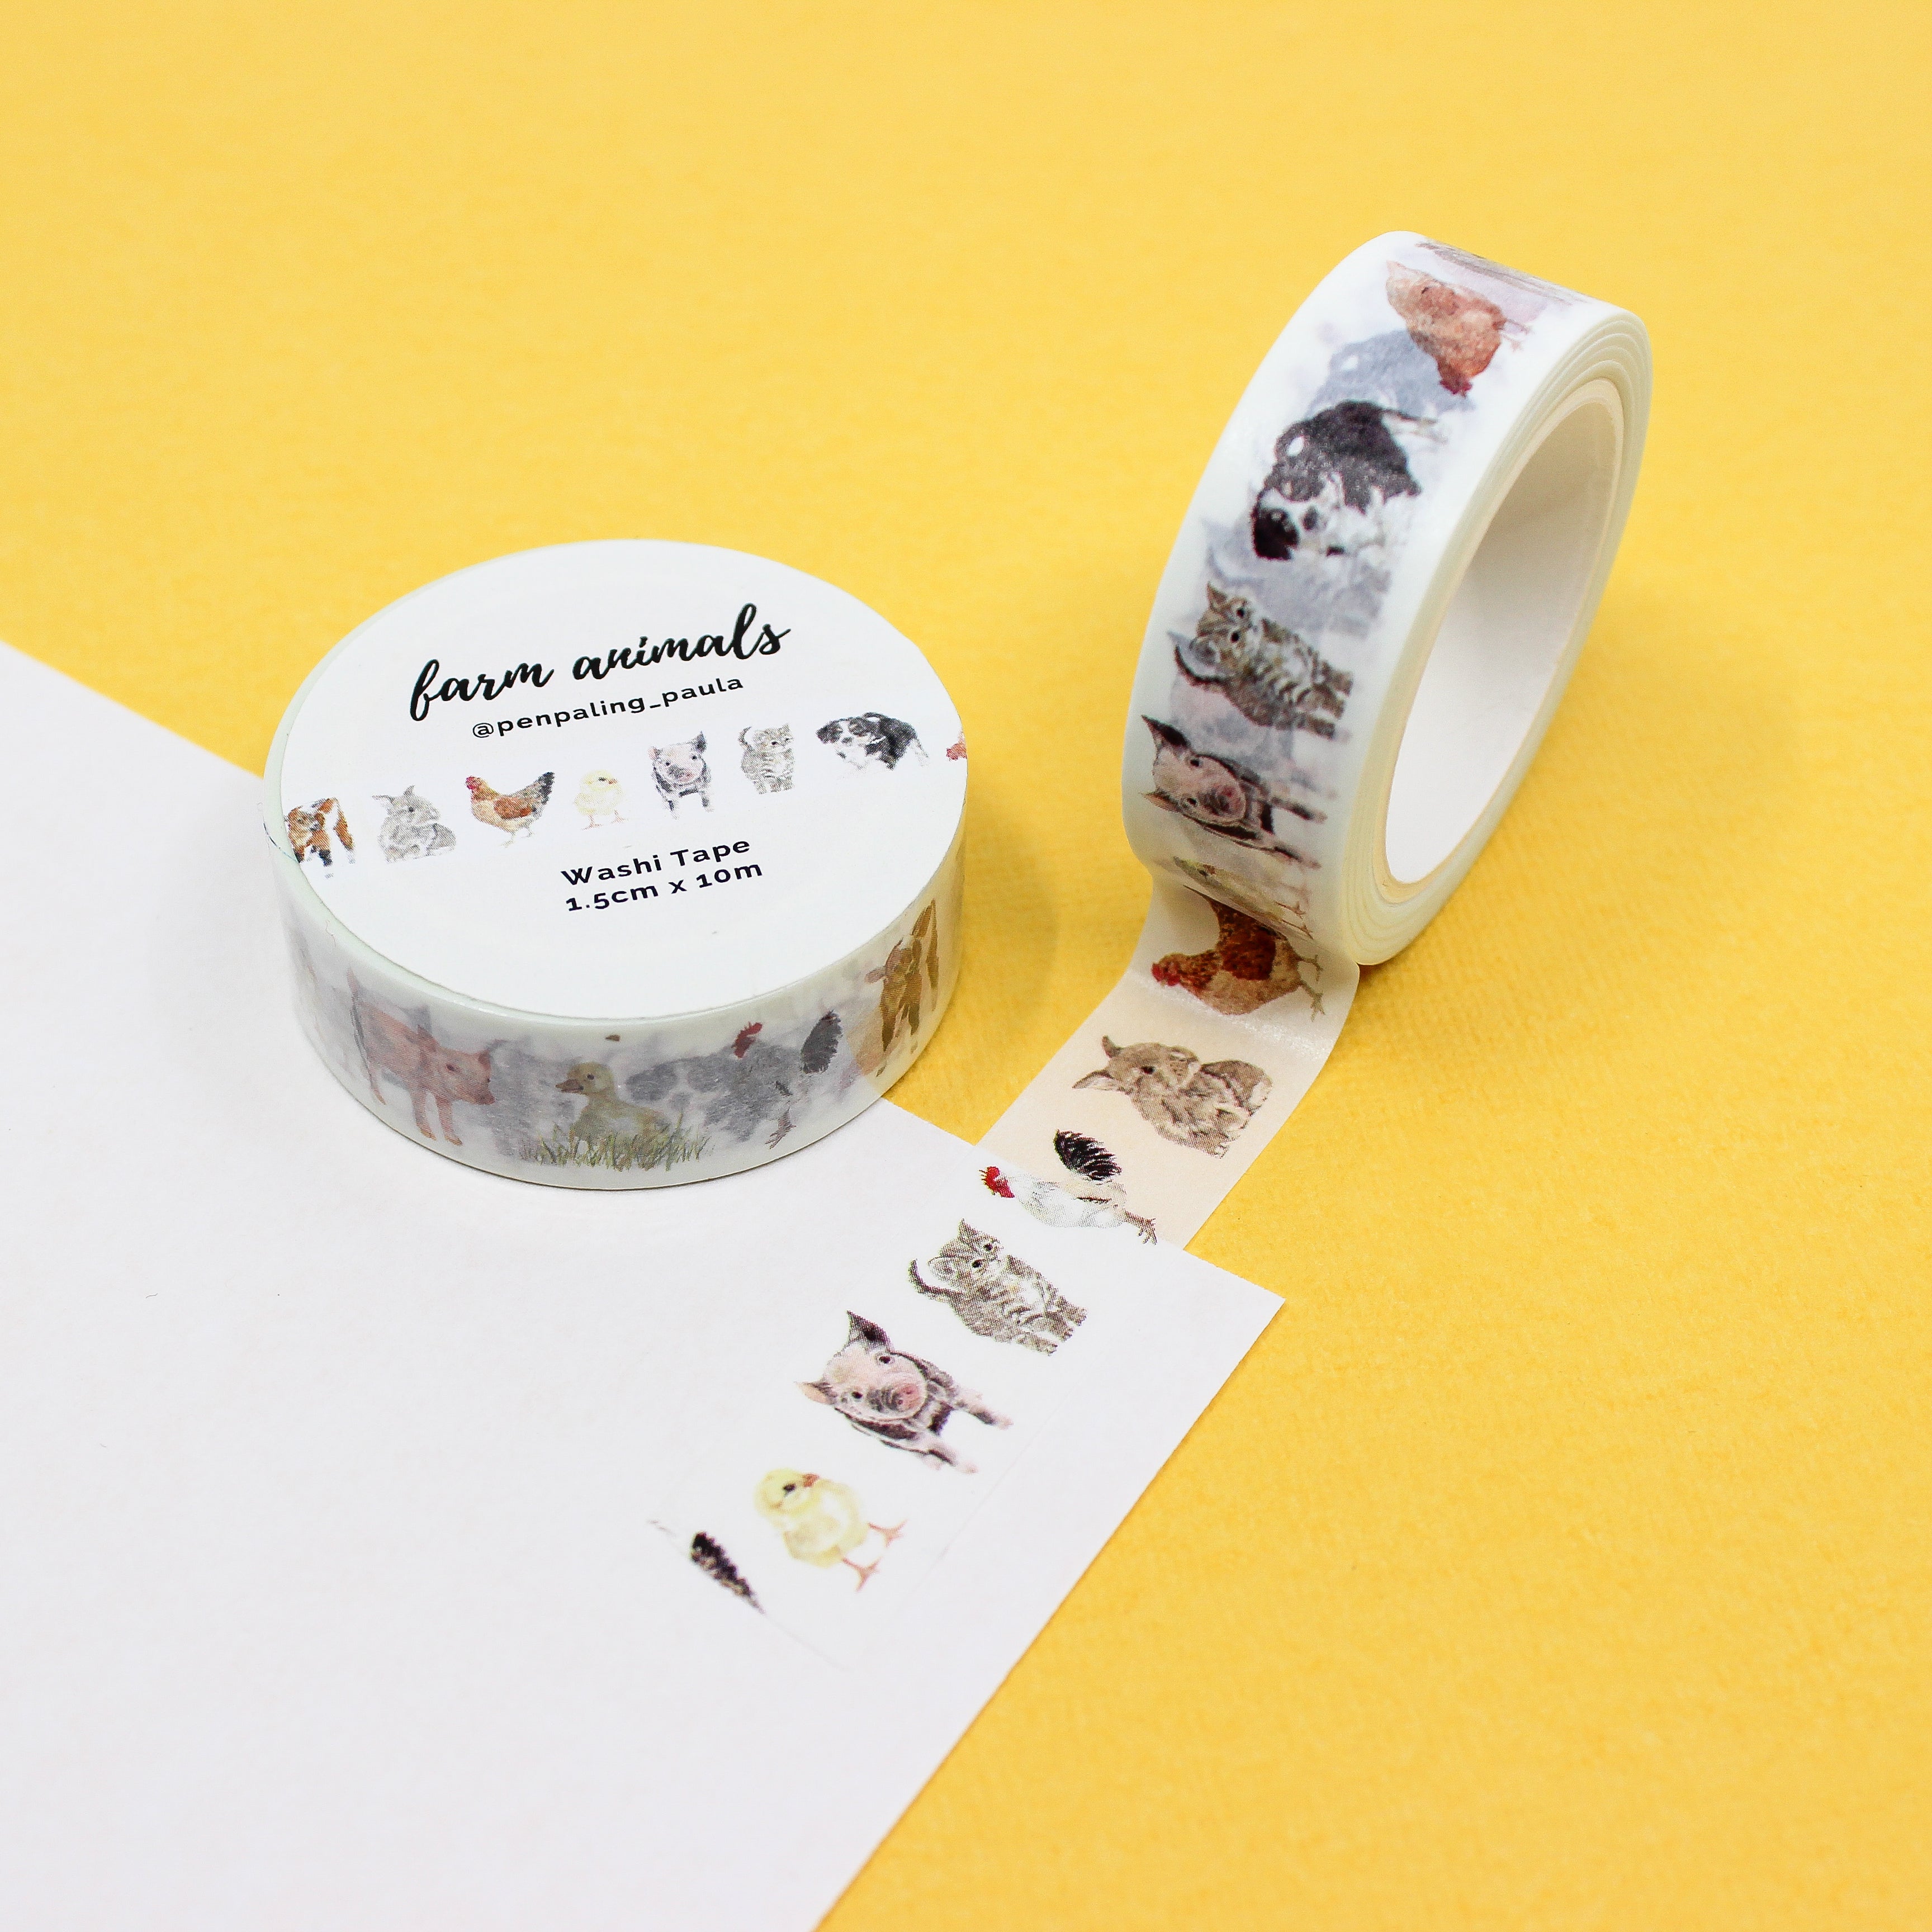 This is a farm animals themed washi tape from BBB Supplies Craft Shop